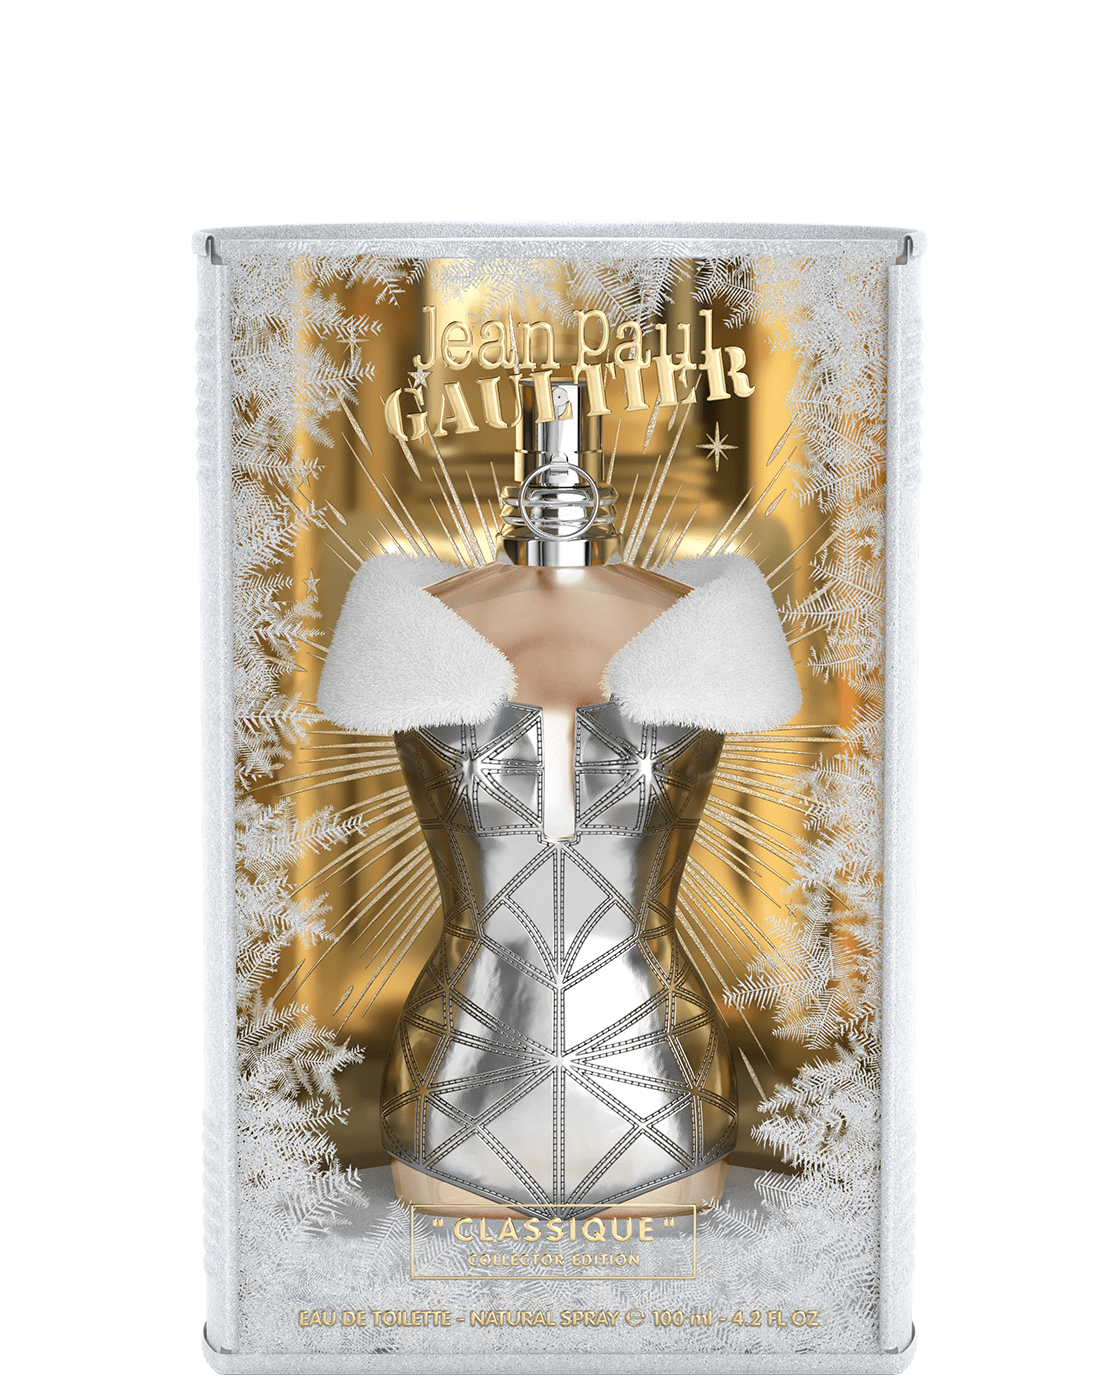 FRAG - Jean Paul Gaultier Cologne by Jean Paul Gaultier For Men After Shave  Lotion 4.2 oz (125mL) – ShanShar Beauty : The world of beauty.